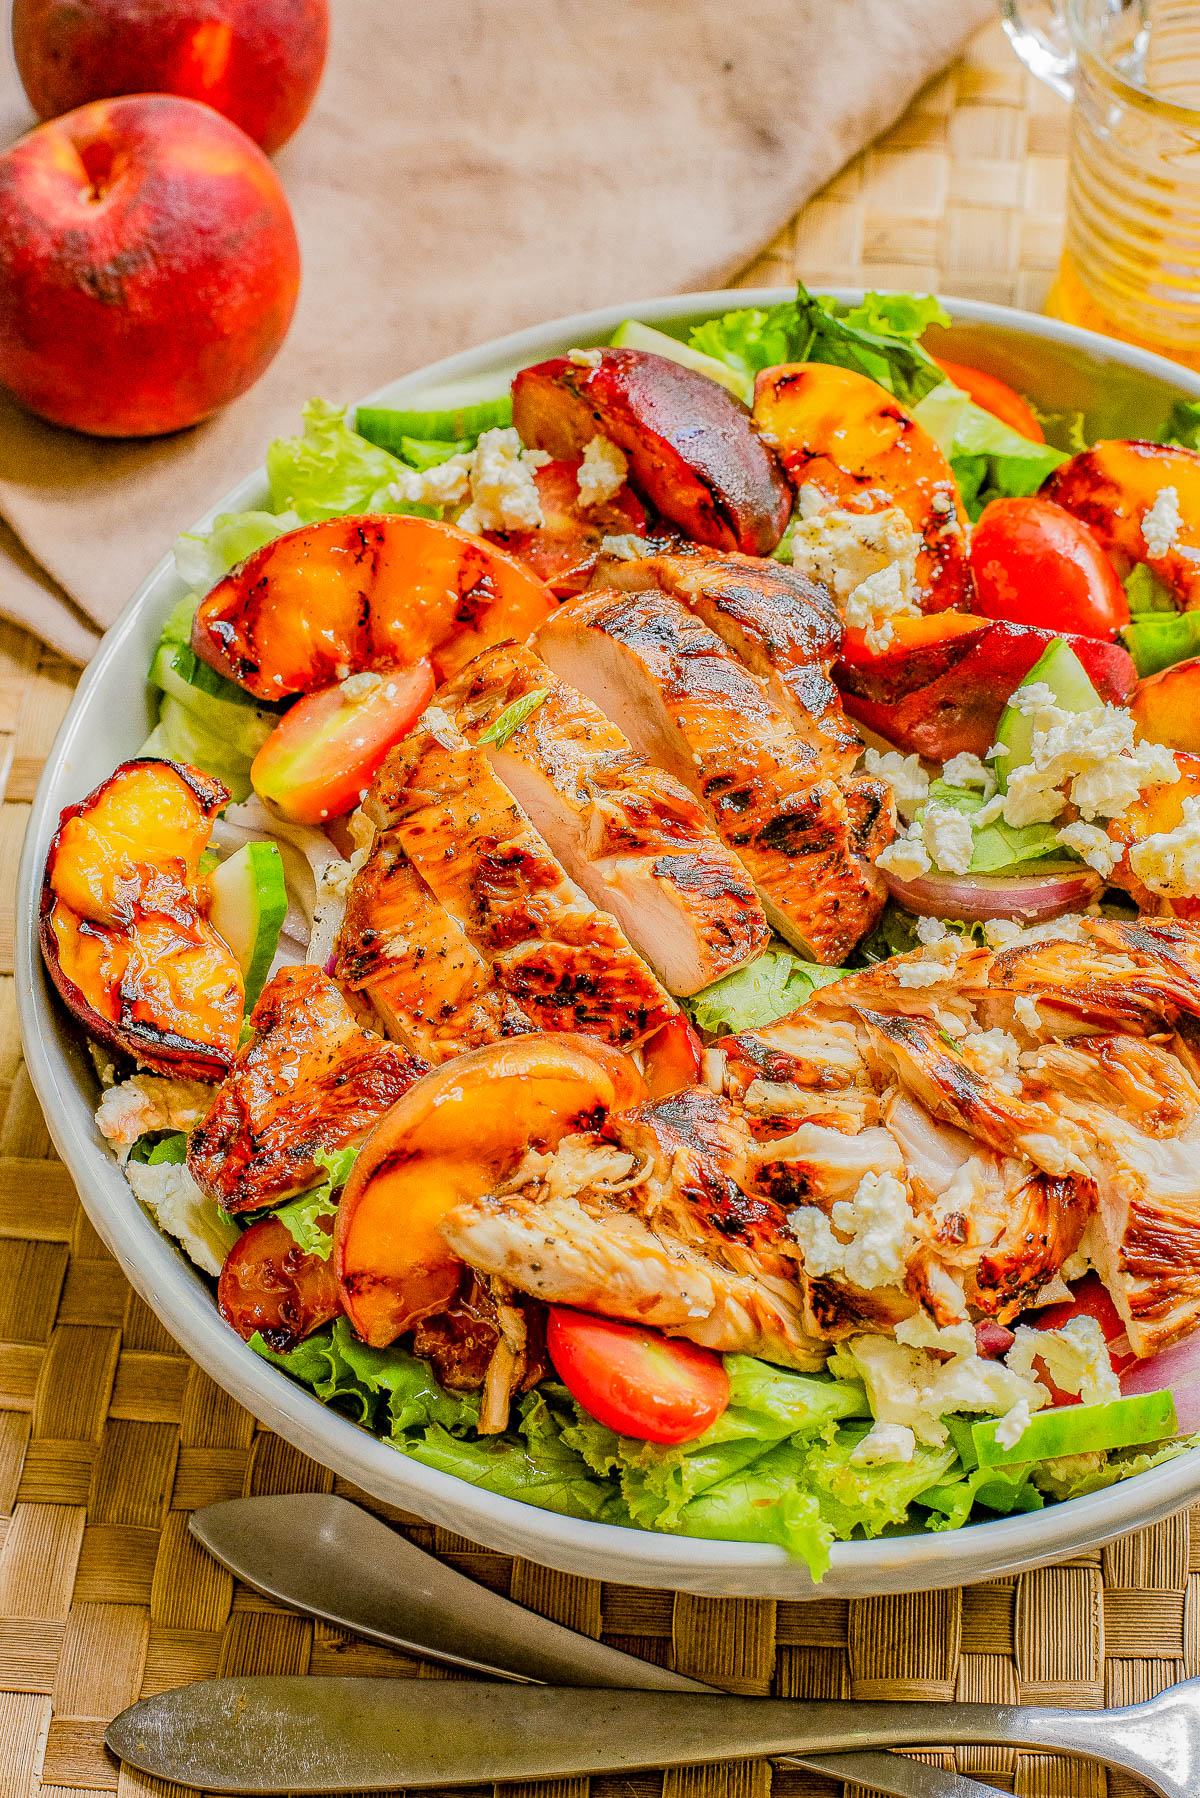 A bowl of grilled chicken salad with peaches, tomatoes, lettuce, and crumbled cheese, placed on a woven placemat with peaches and a drink in the background.